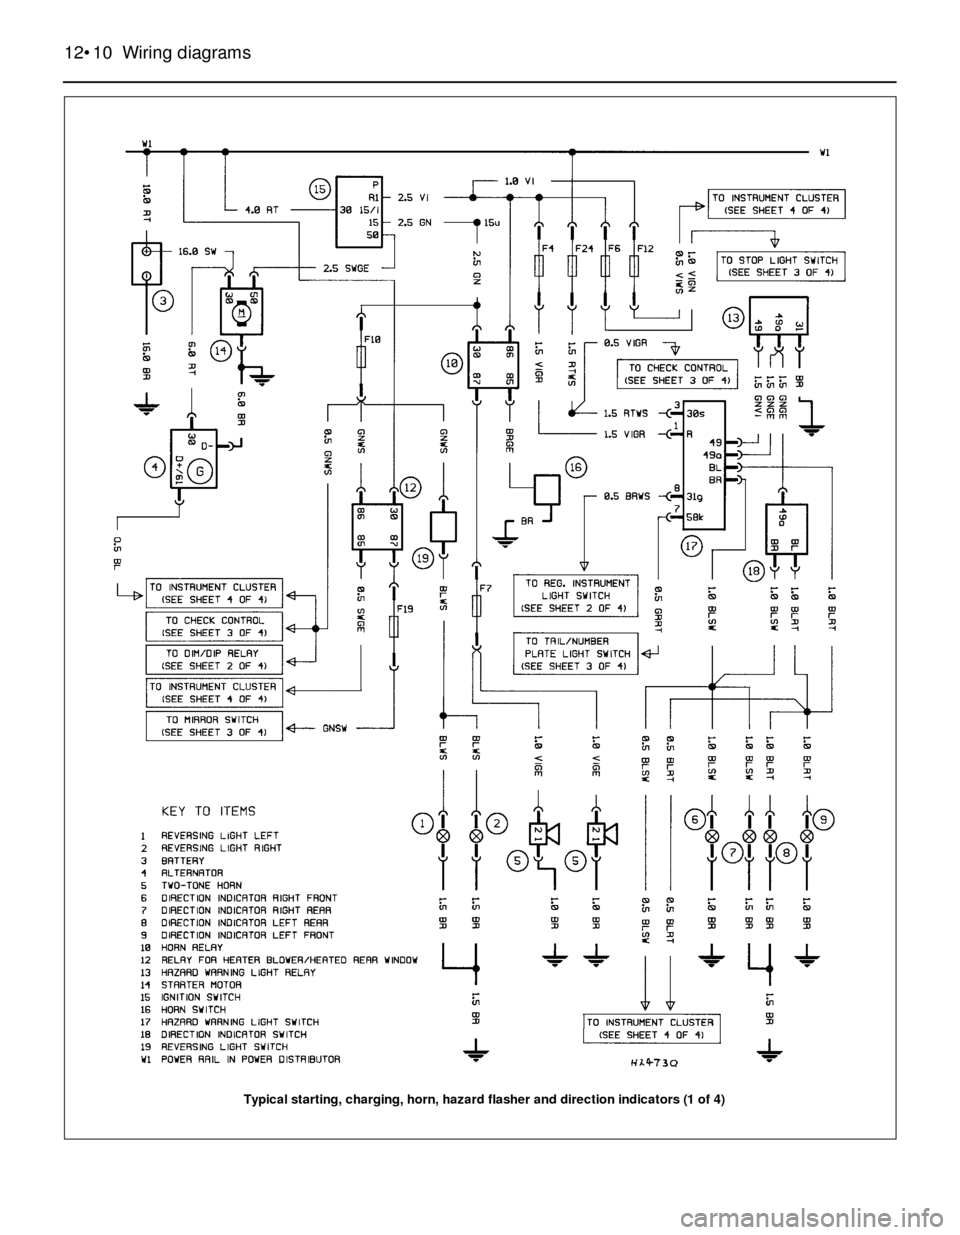 BMW 5 SERIES 1991 E34 Workshop Manual 12•10 Wiring diagrams
Typical starting, charging, horn, hazard flasher and direction indicators (1 of 4) 